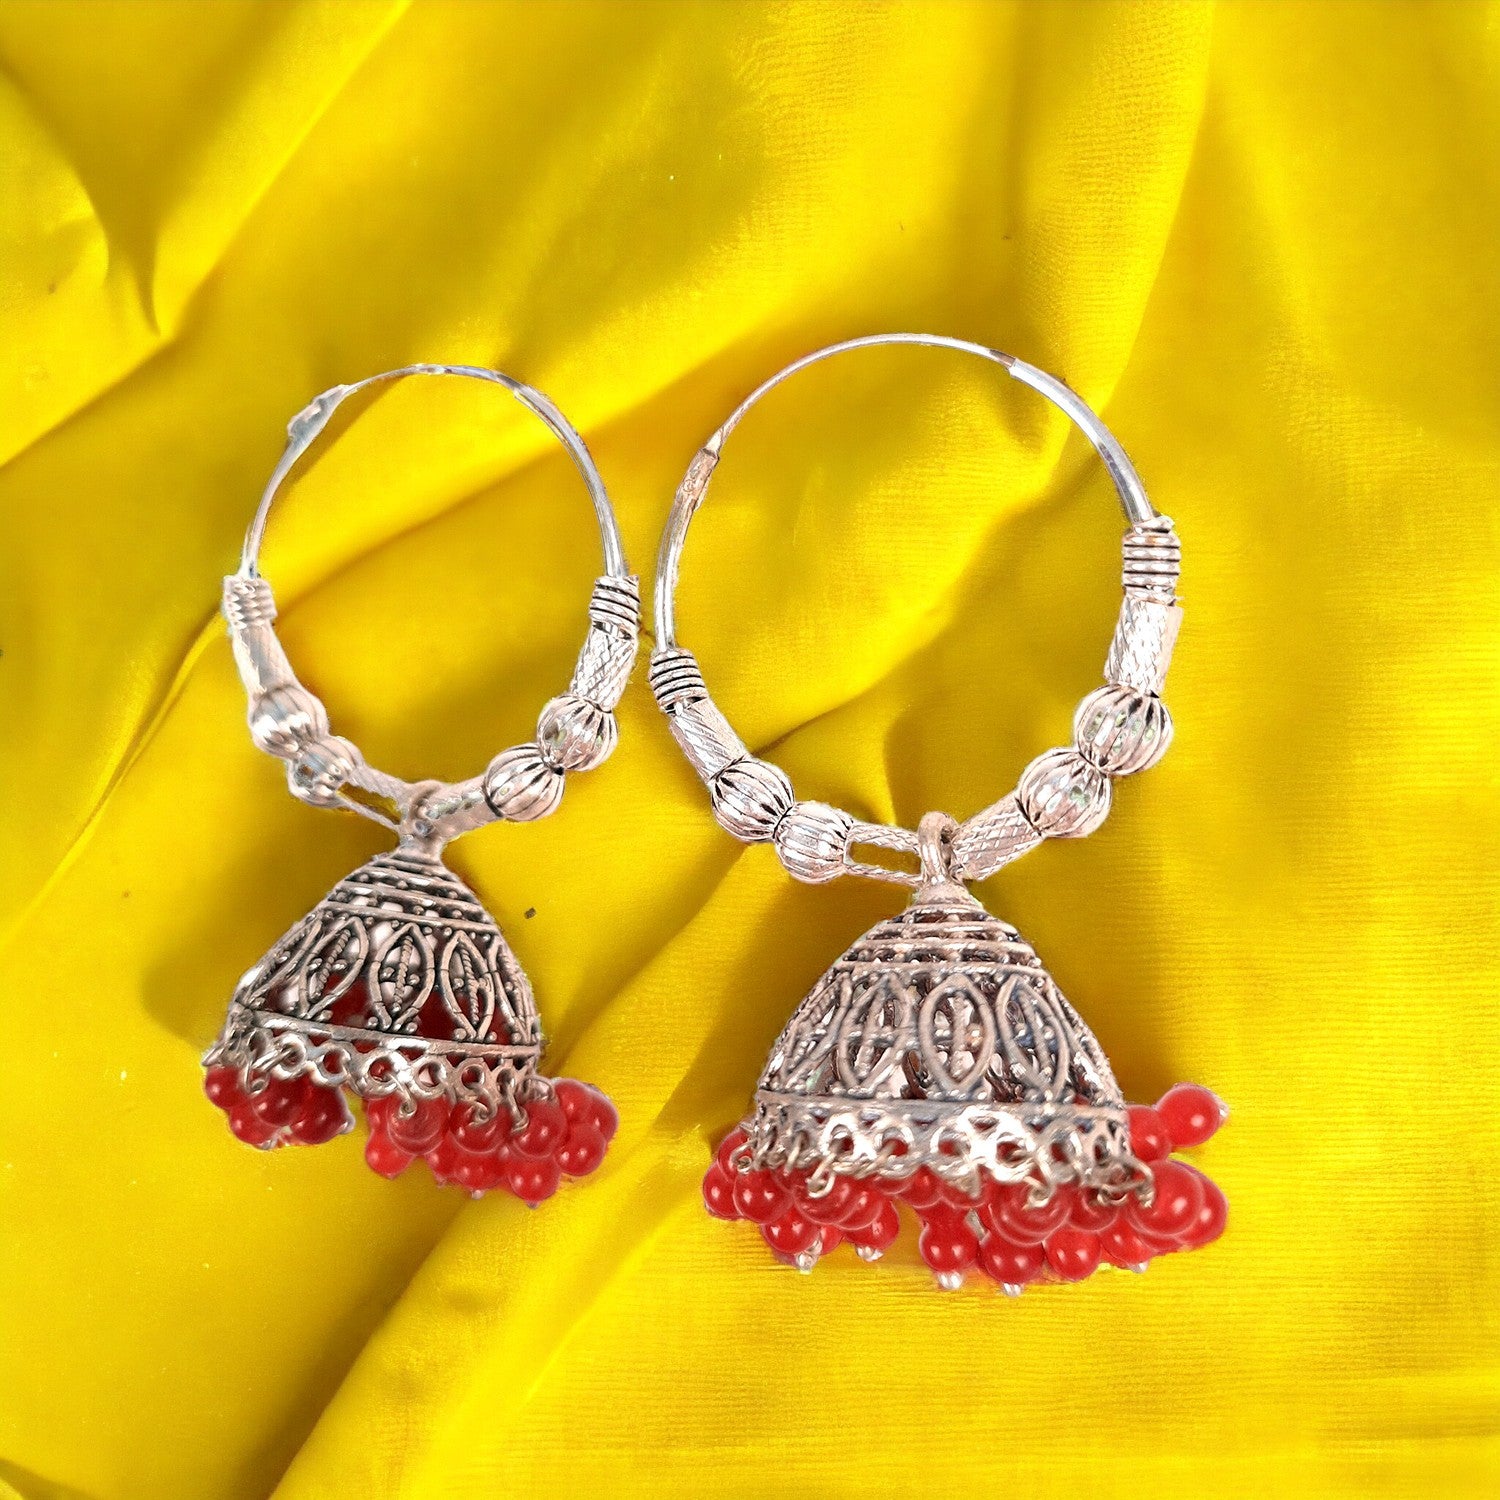 Earrings for Girls and Women - Jhumka | Oxidised Jewelry | Latest Stylish Fashion Jewellery | Gift for Her - Apkamart